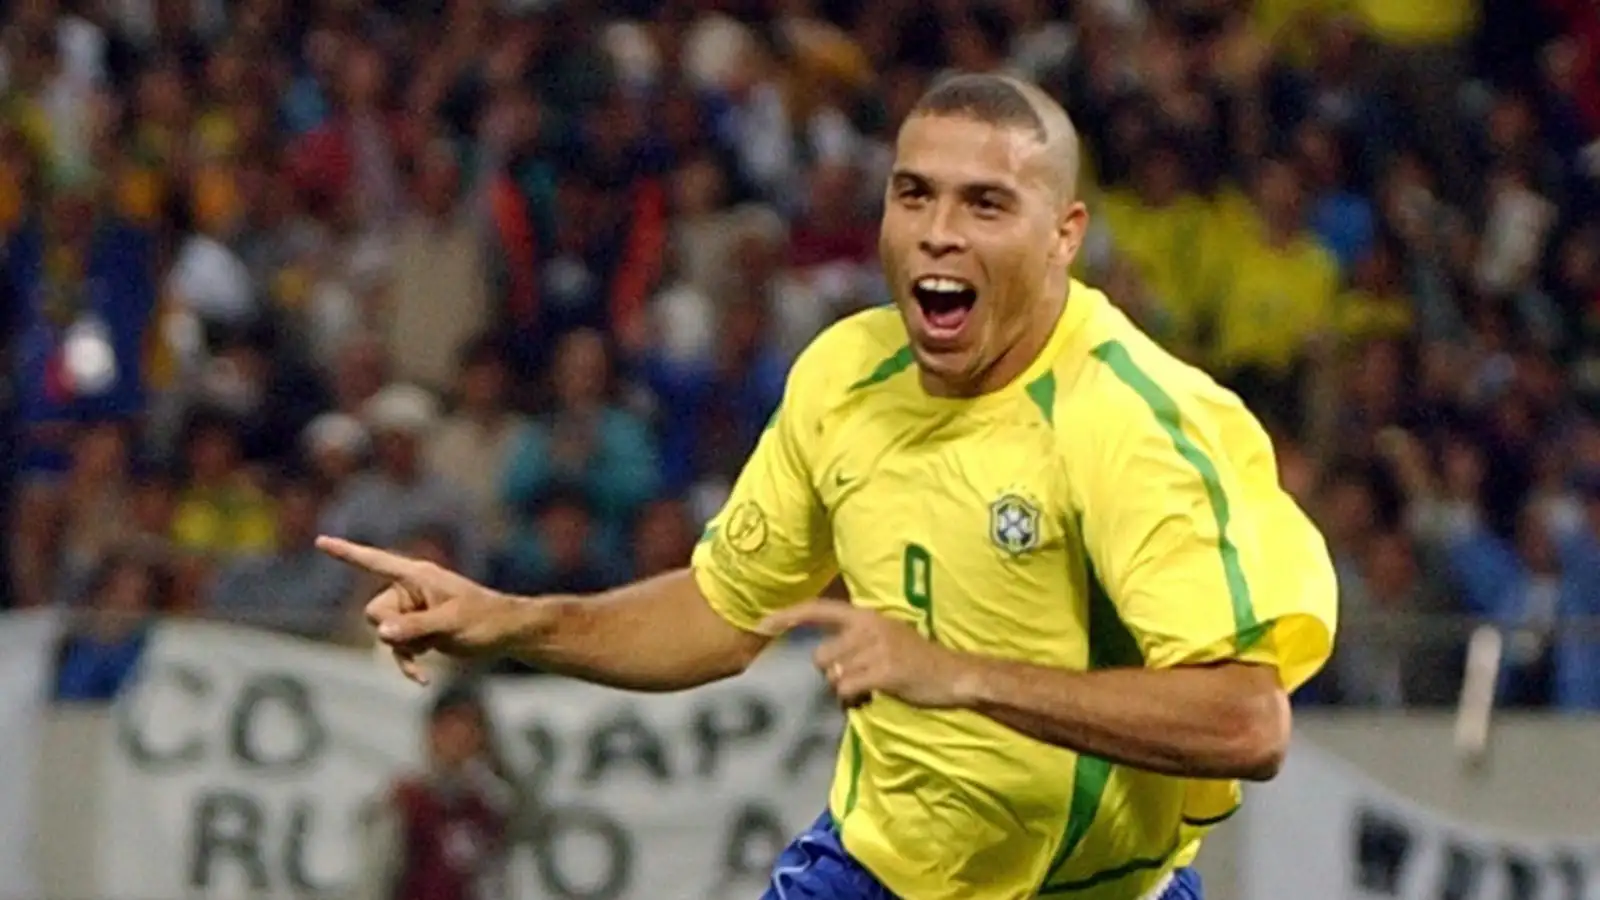 A celebration of Ronaldo fan sites of the early 2000s – ‘My header is bad’